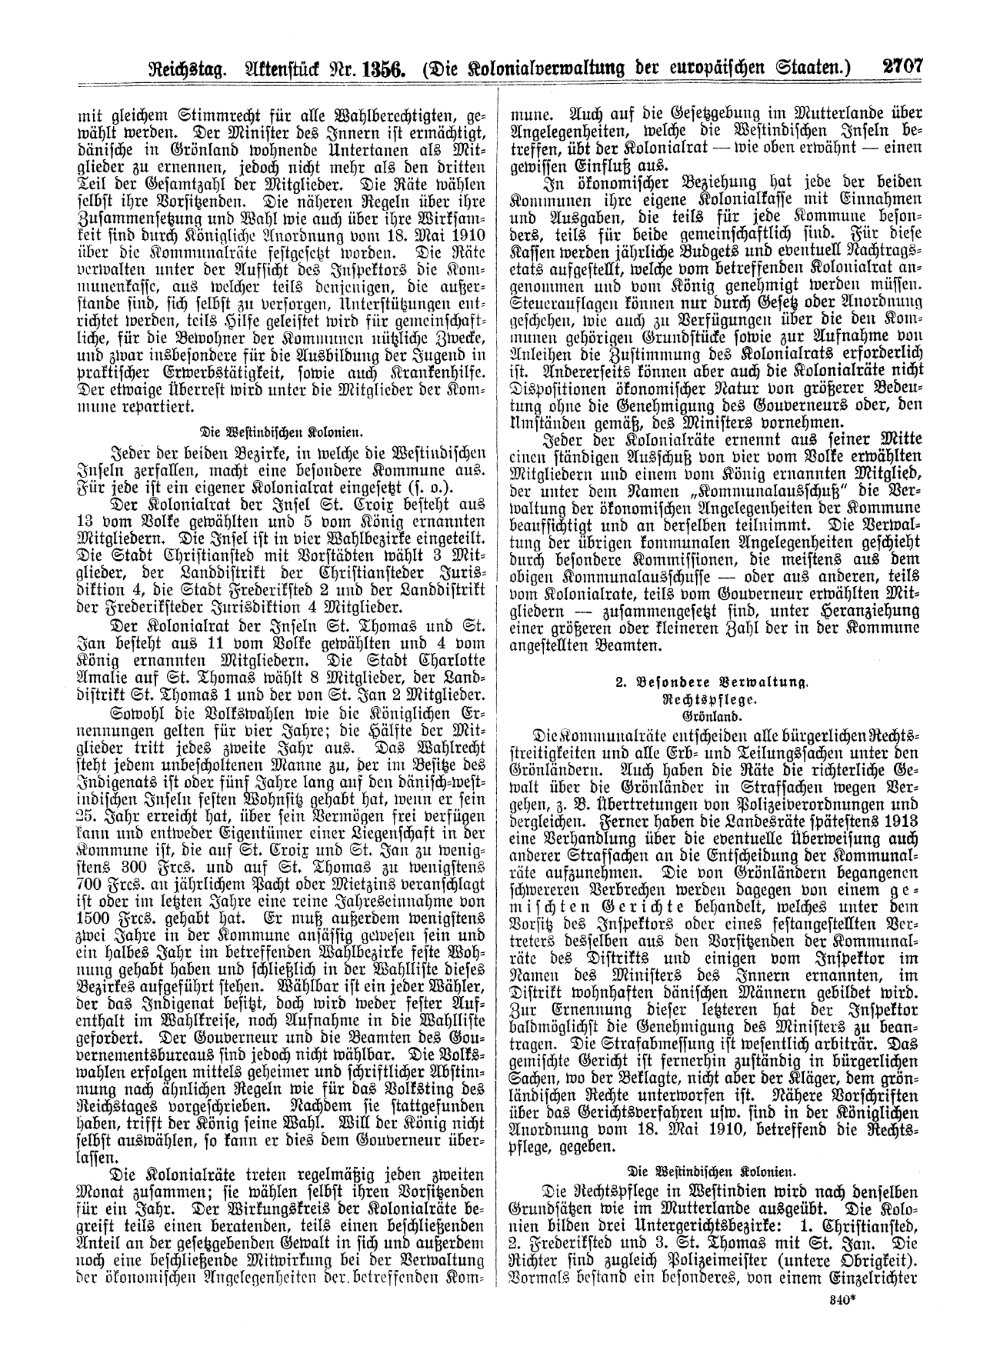 Scan of page 2707